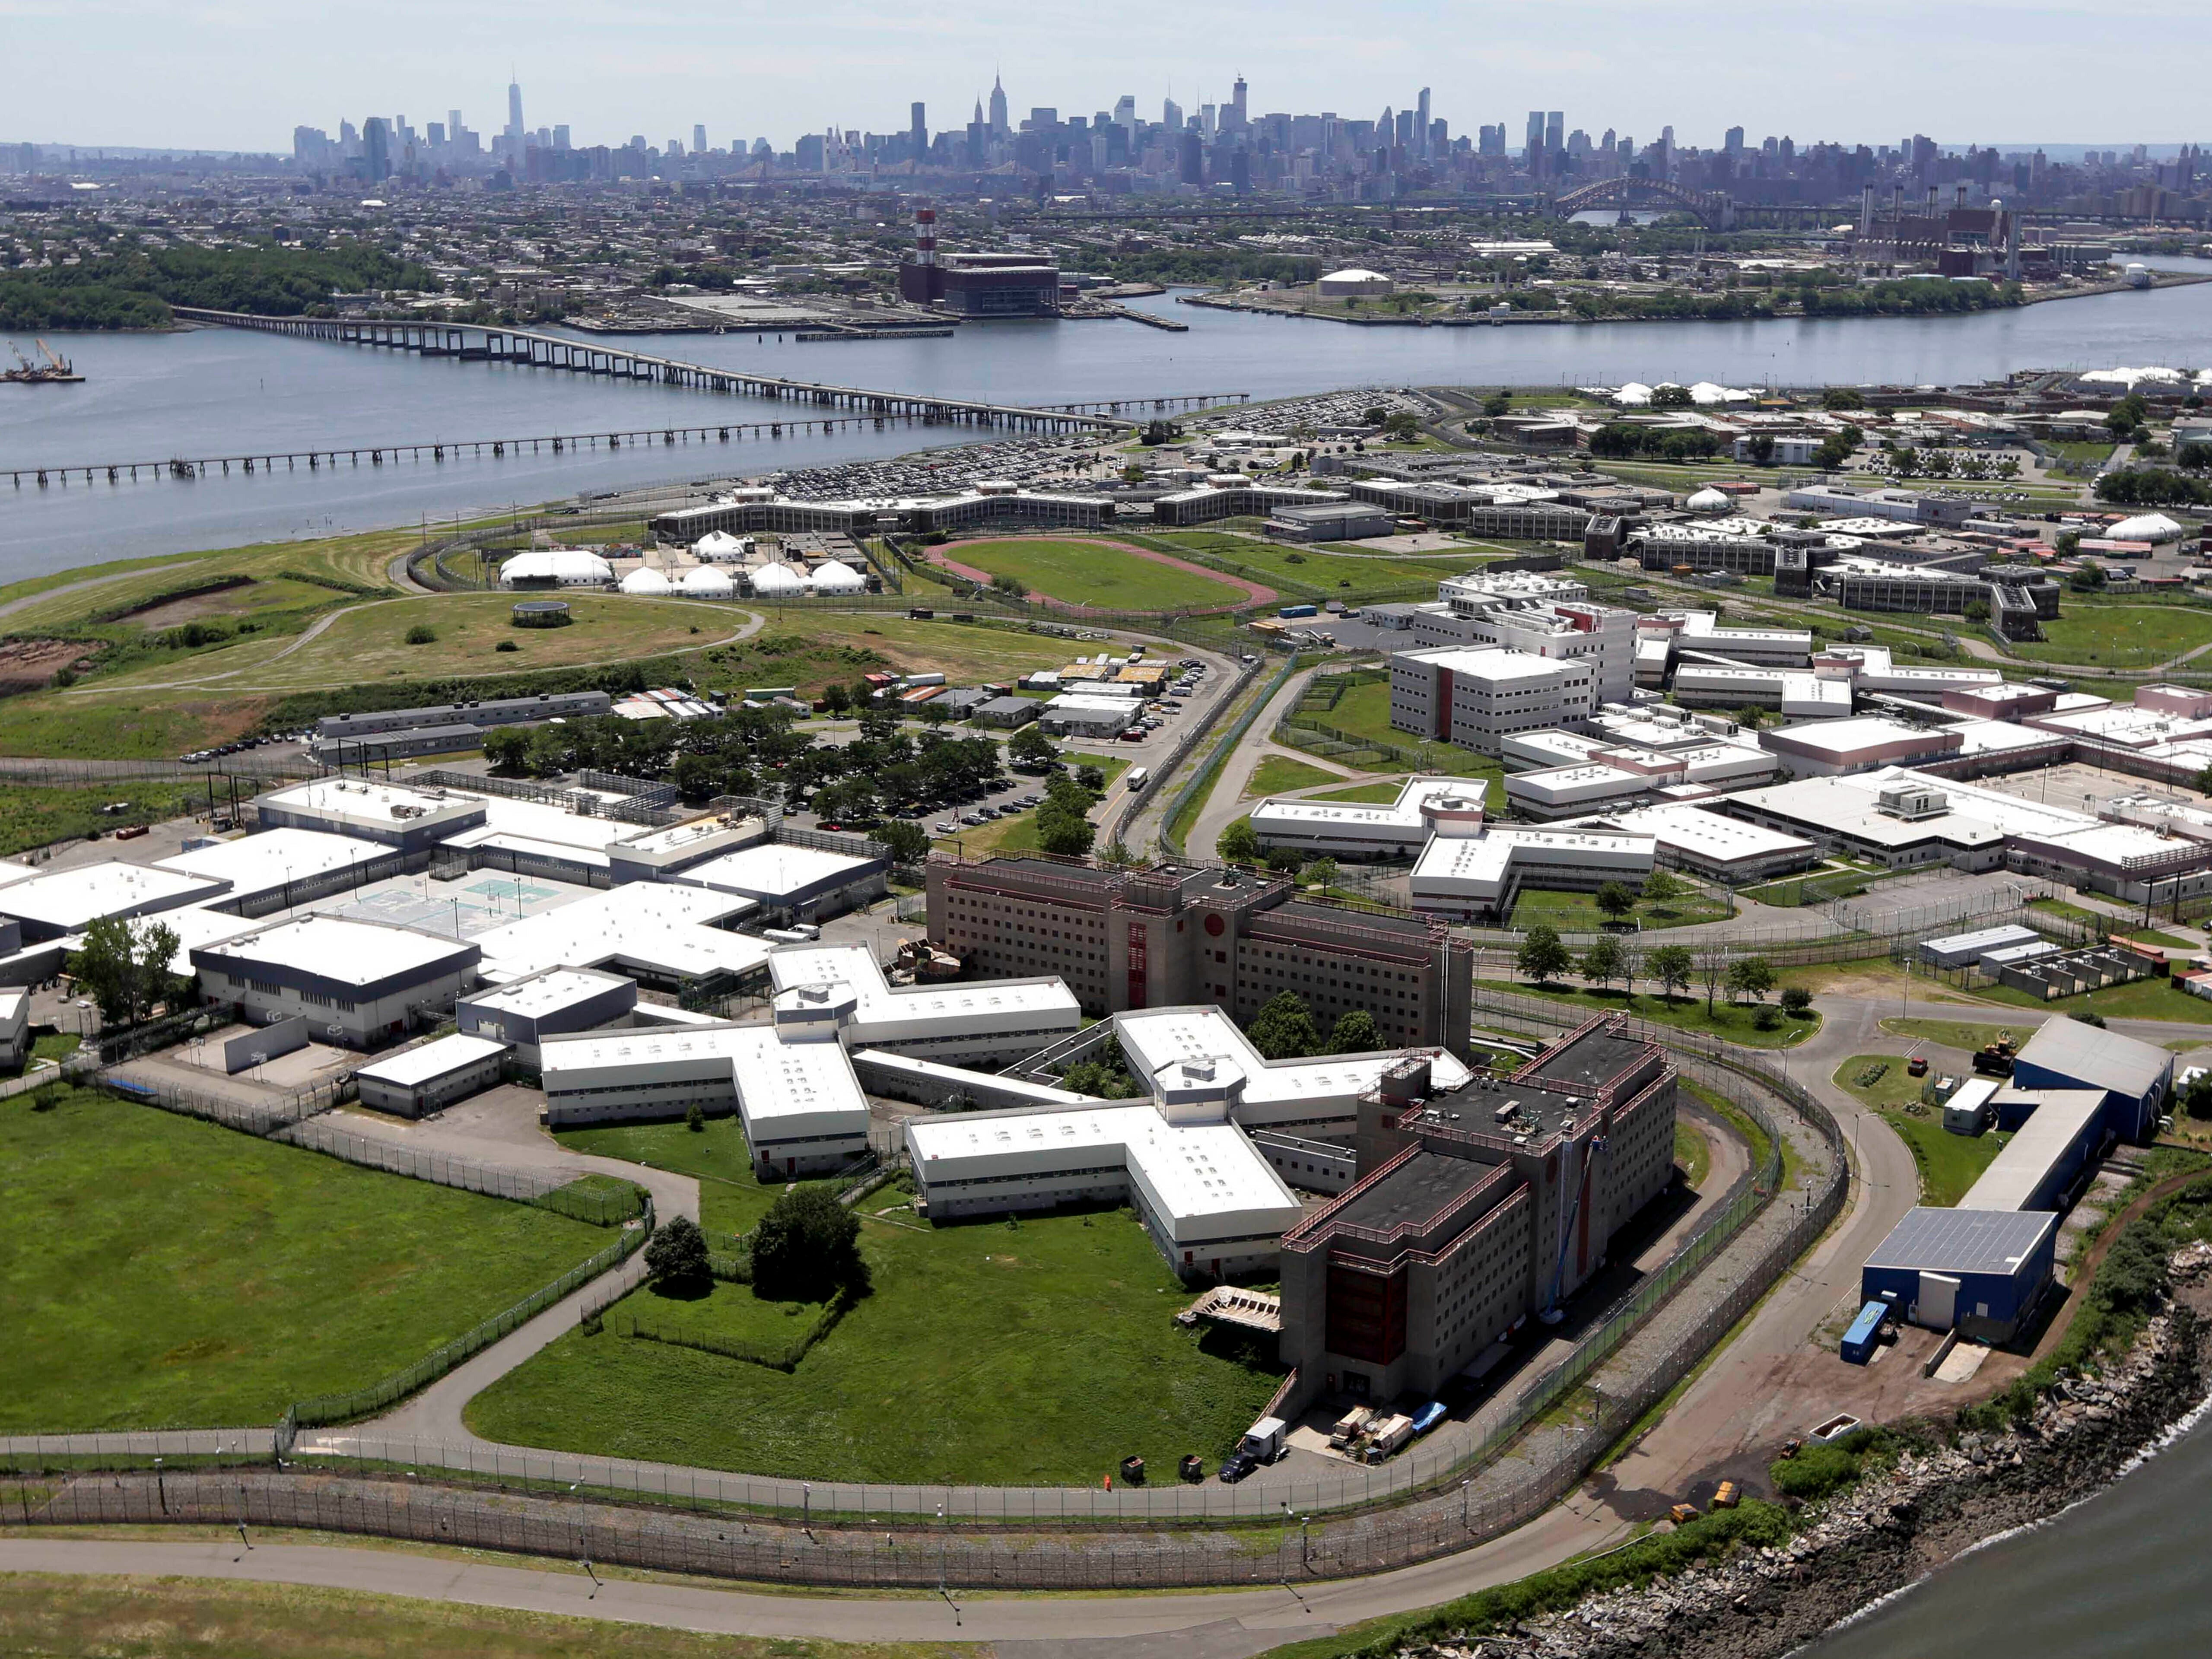 The infamous Rikers Island jail complex in New York City